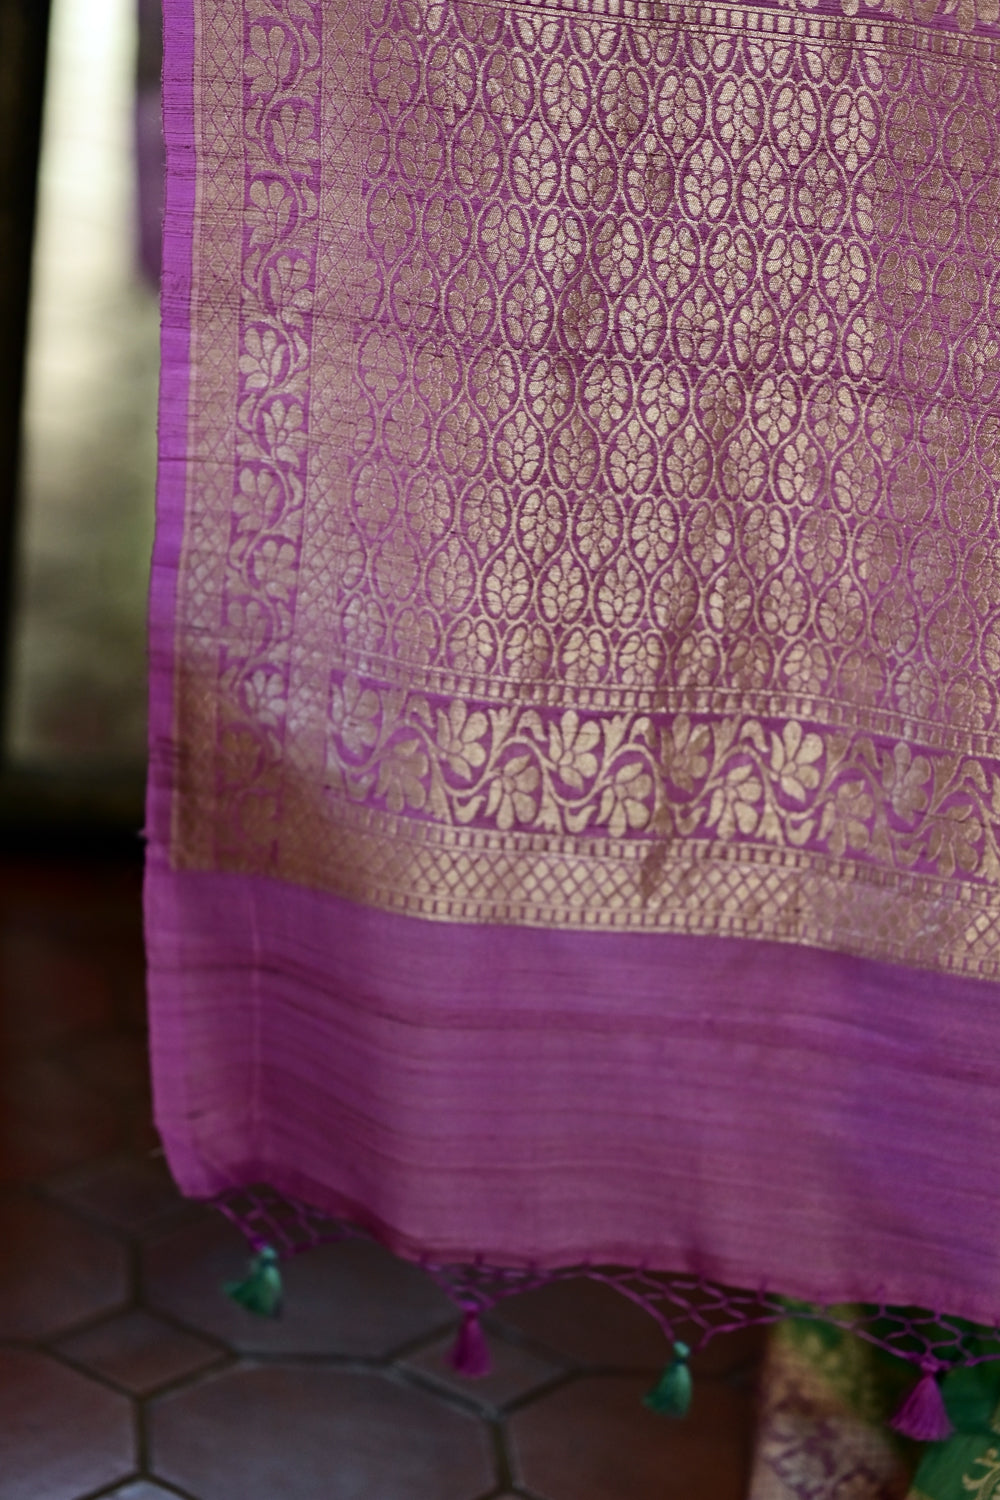 Exquisite Tussar Georgette Silk Saree in Aqua and Lavender with Silver Paisley Jaal | SILK MARK CERTIFIED: PRE-ORDER